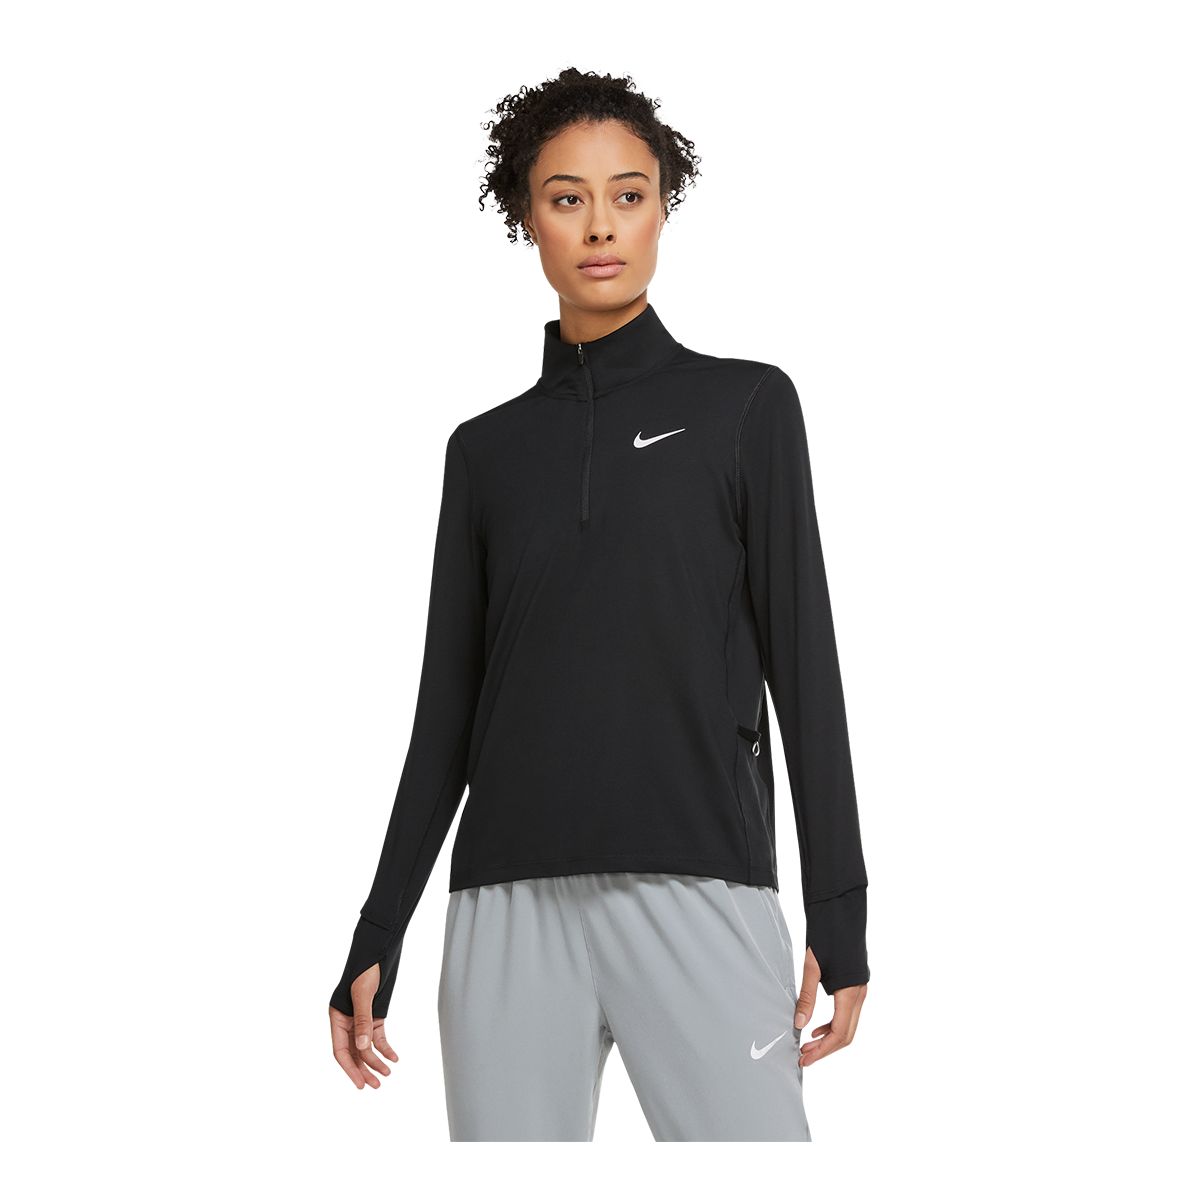 Nike Women's NSW Everyday Mod High Rise Wide Pants